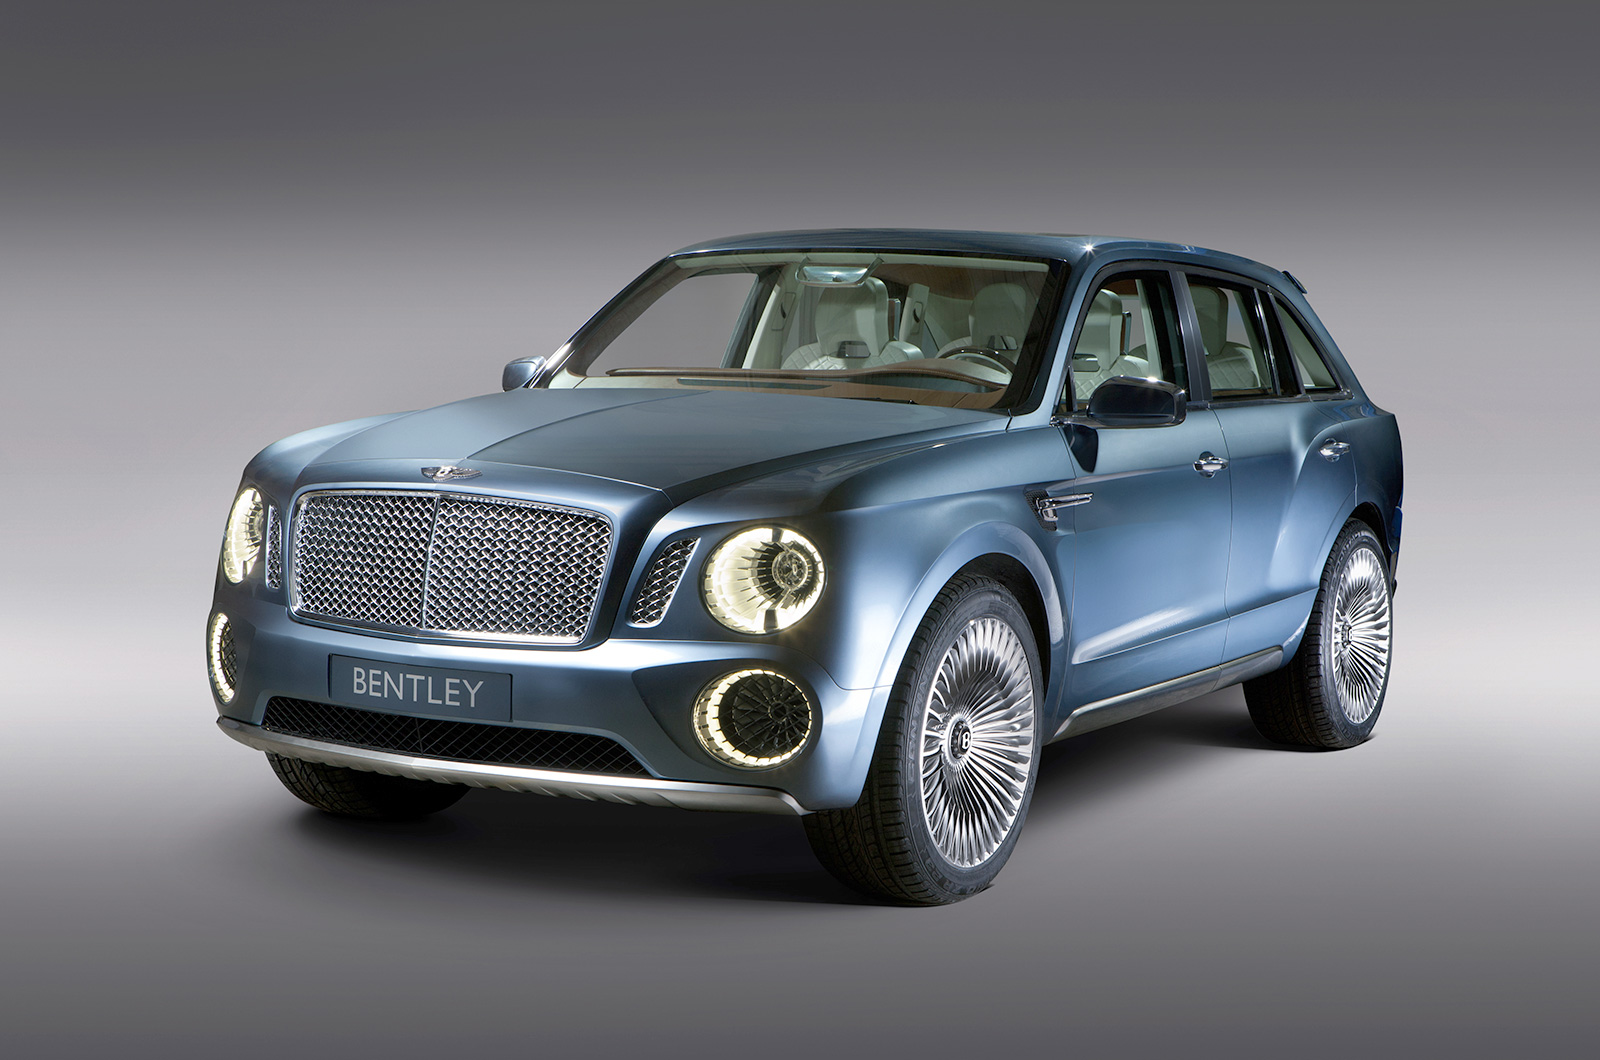 <p>When it was unveiled at the 2012 Geneva motor show, the Bentley EXP 9 F attracted a pretty mixed response. While most people appreciated why Bentley was making a SUV, many queried the design. In the nose was a <strong>6.0-liter W12 </strong>petrol engine, of the type that Bentley had been using in the Continental GT for a decade – but diesel and plug-in hybrid powertrains were also mooted.</p>